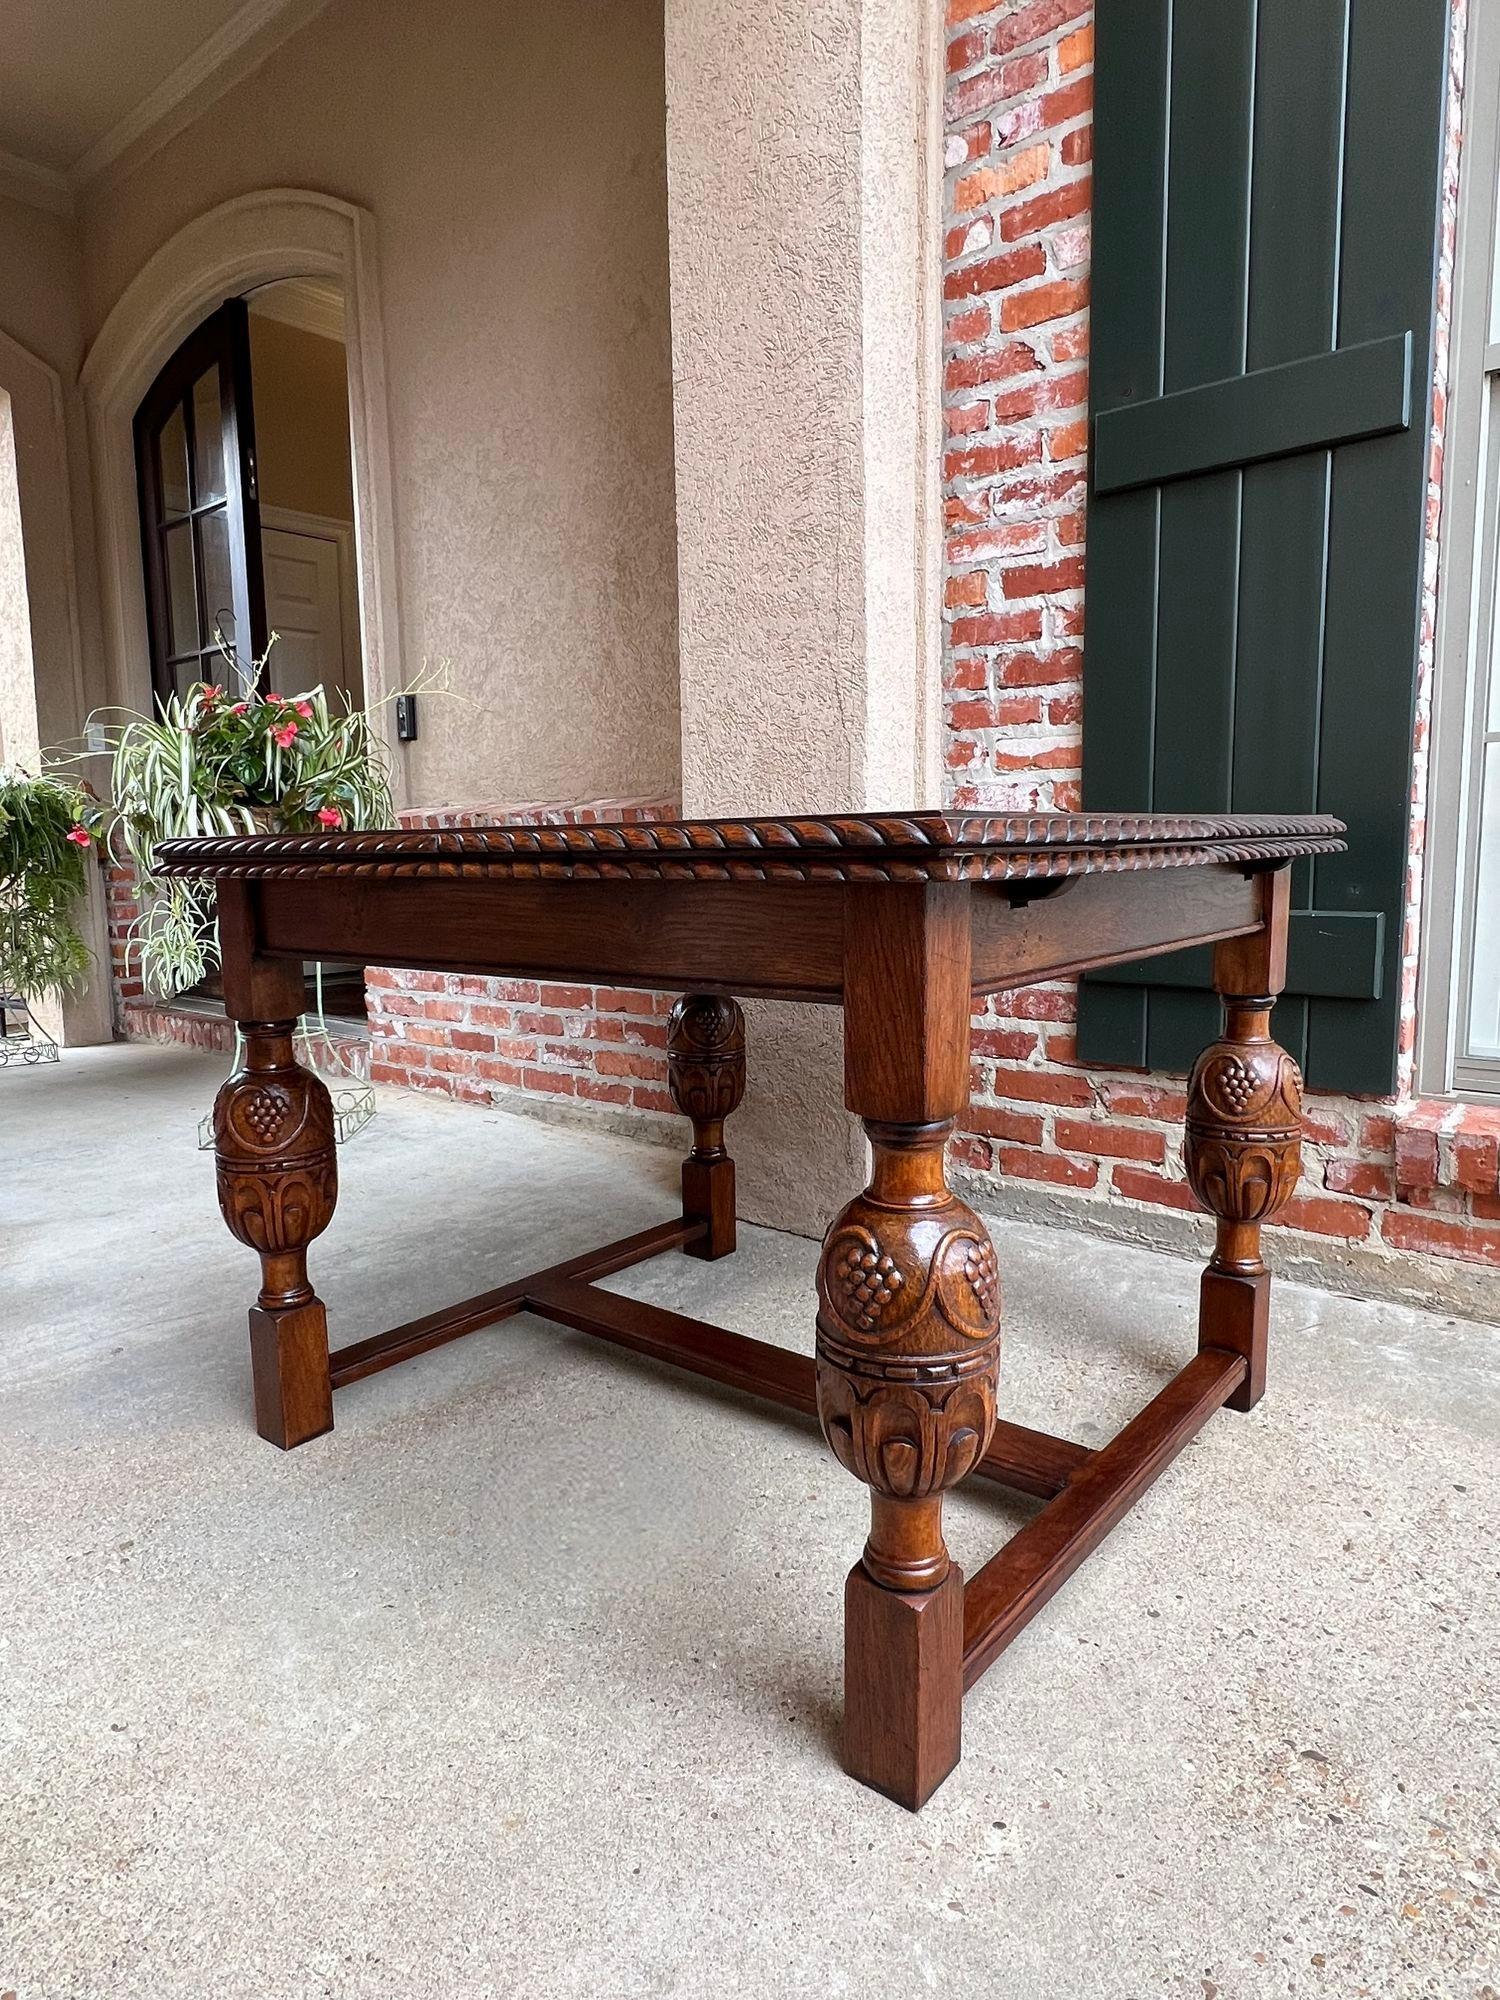 Antique English Dining Table Draw Leaf Tudor Carved Tiger Oak Large Size Game or Kitchen Table.

 Direct from England, a beautiful antique draw leaf table that expands to almost 6 ft. with leaves extended! The large, paneled tabletop features